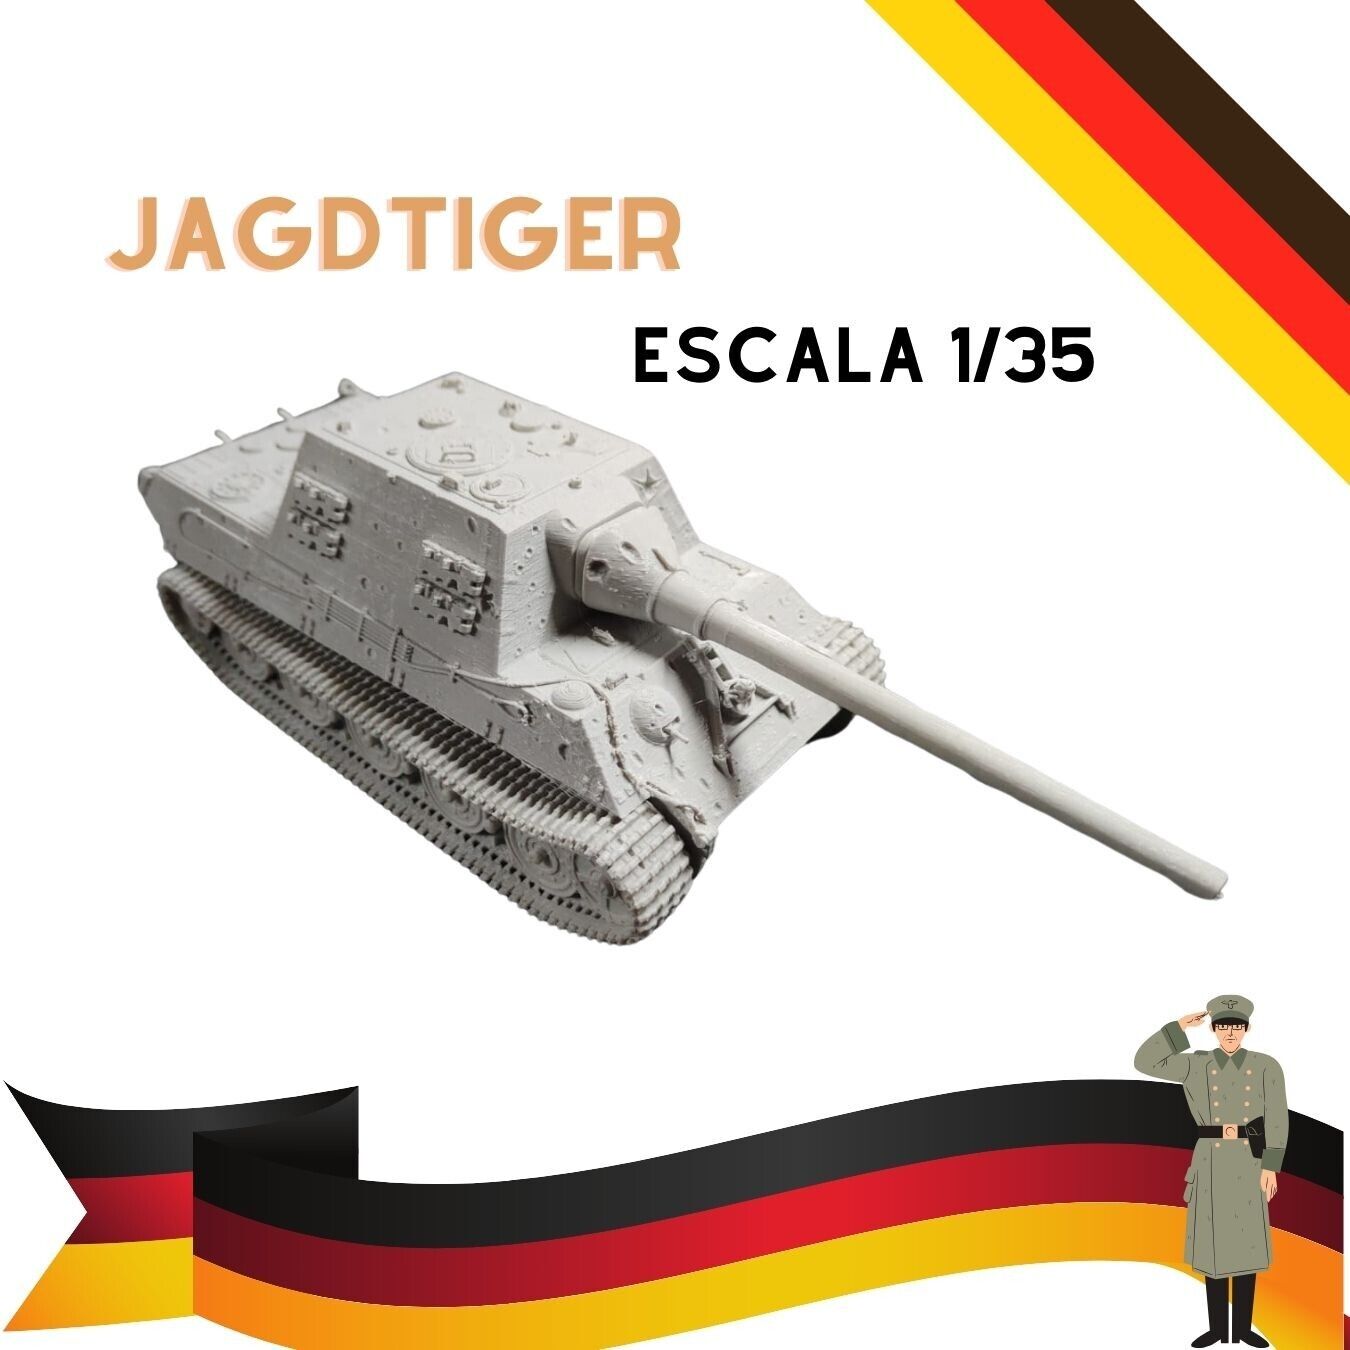 German Jagdtiger with bullet impacts ww2 scale 1:35 Models Kits DIY